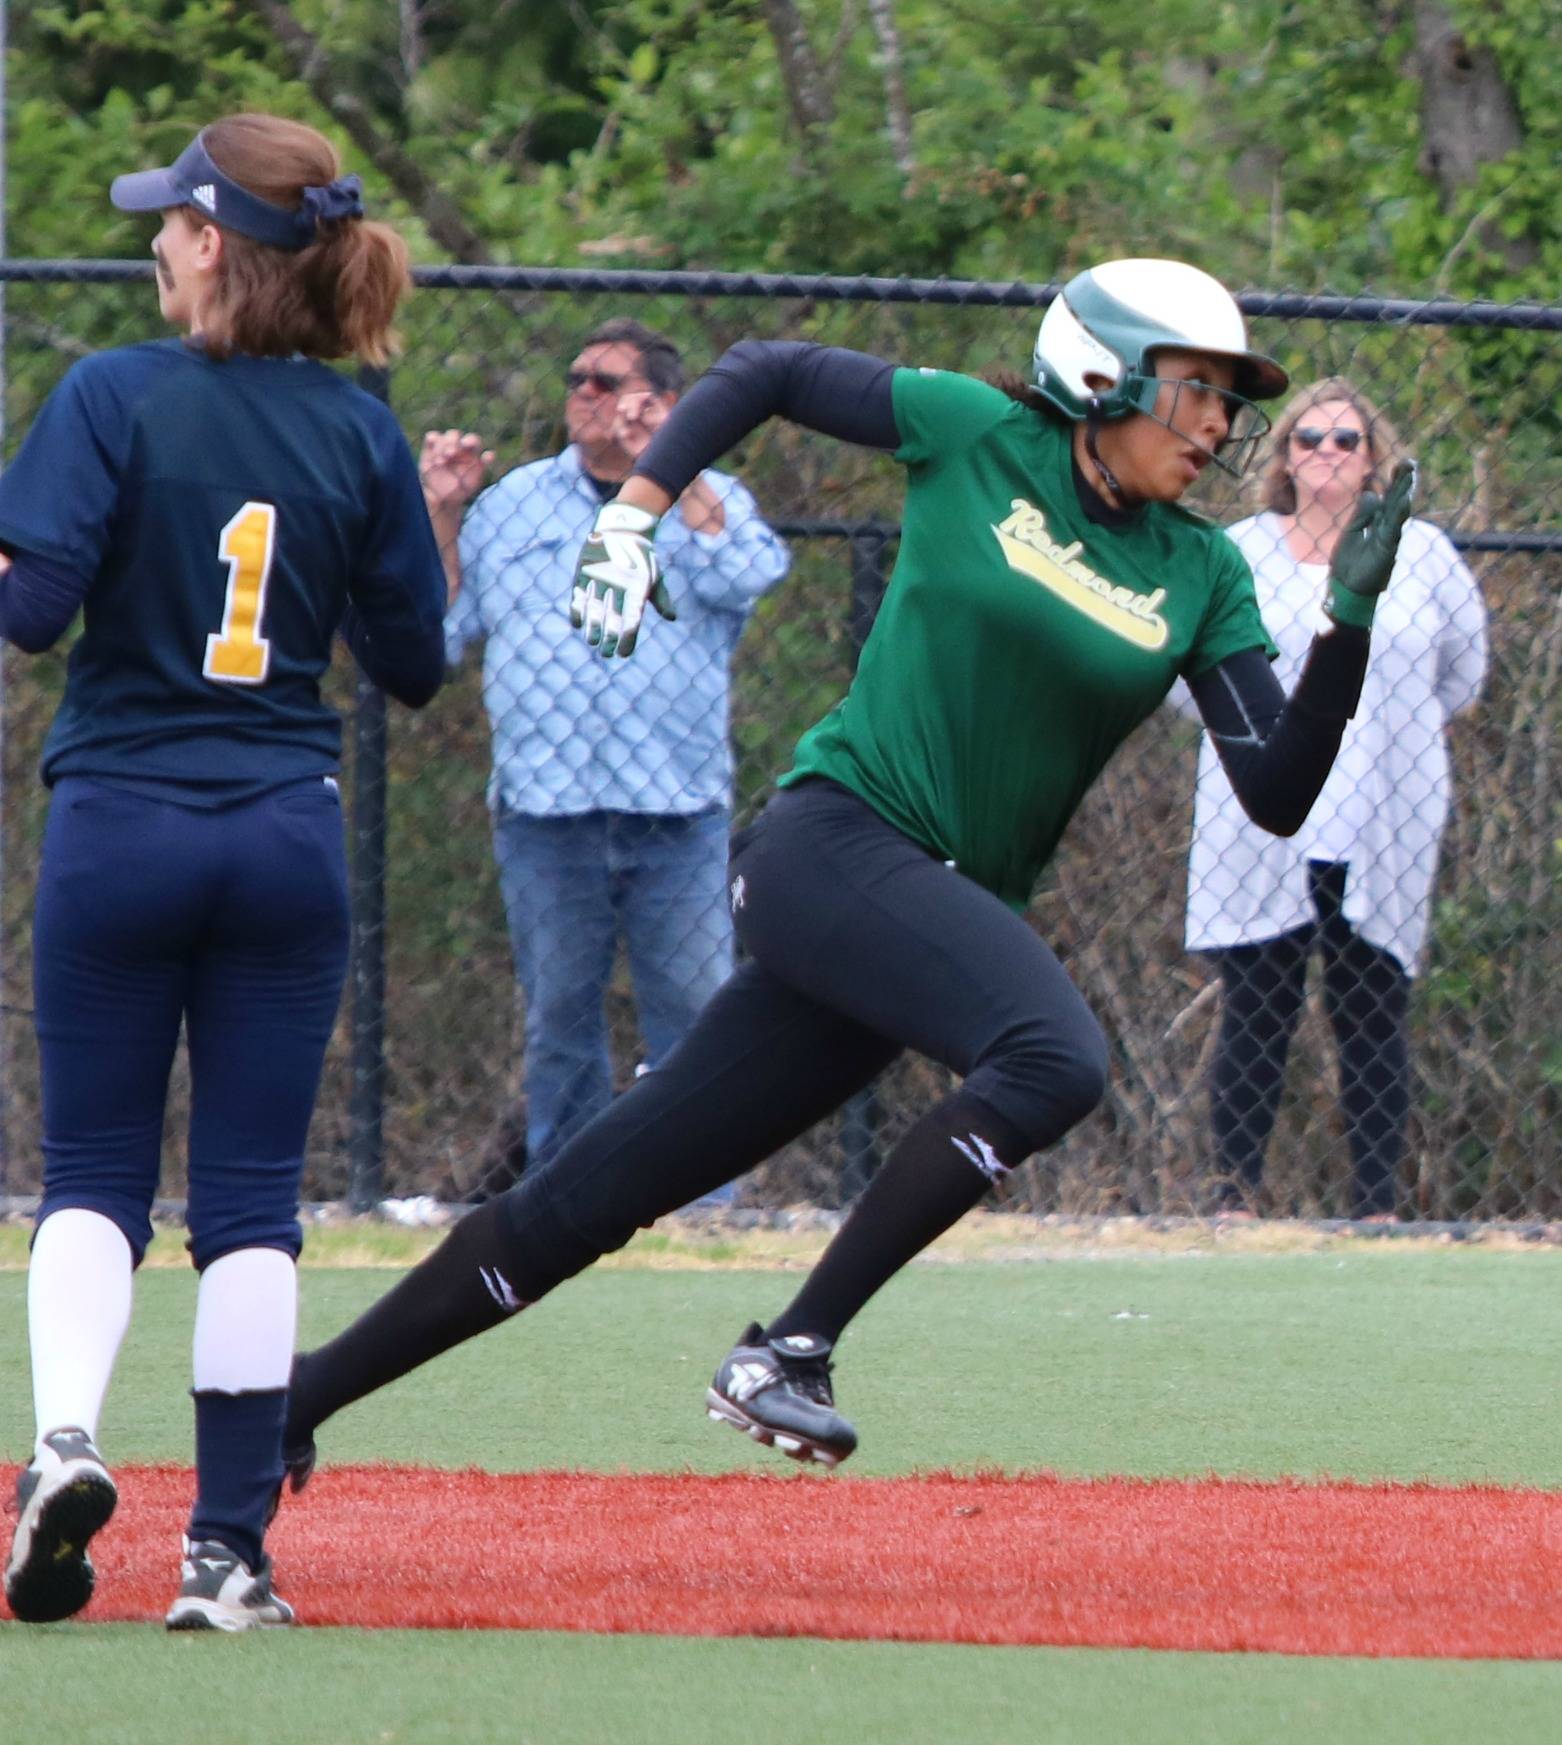 Kiki Milloy on her way to a triple. Andy Nystrom / staff photo